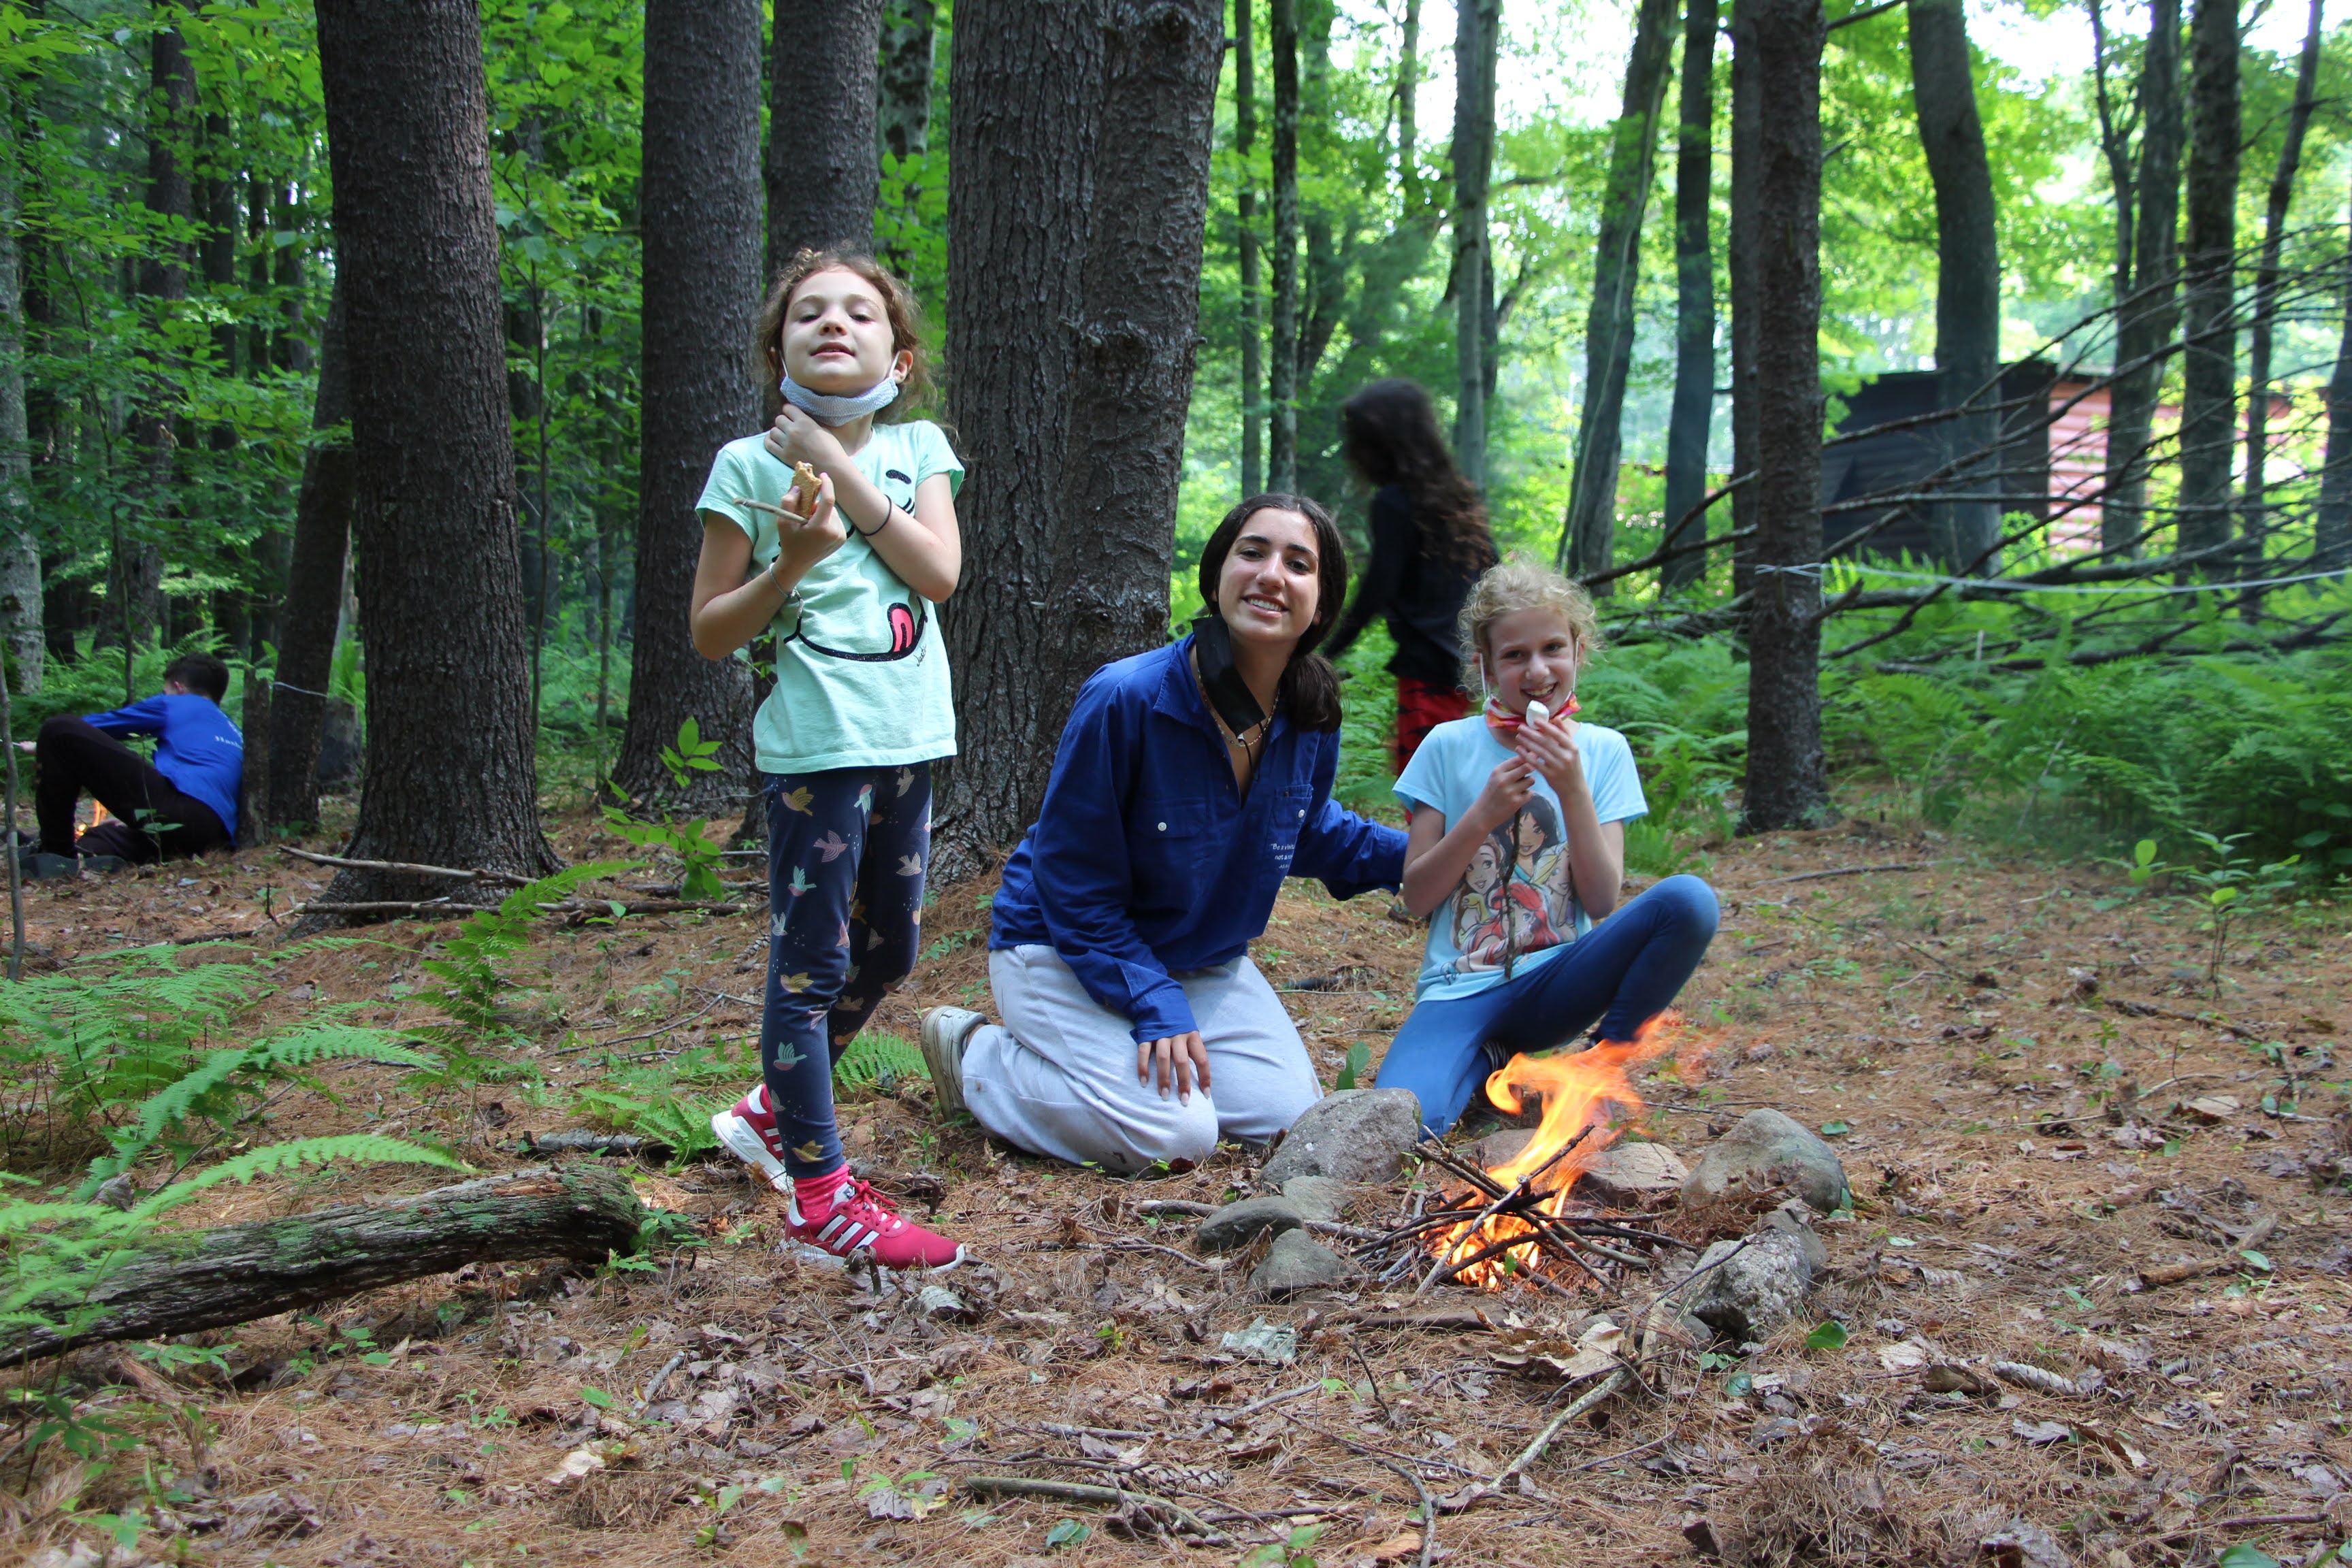 counselor and 2 campers roasting marshmallow on a campfire